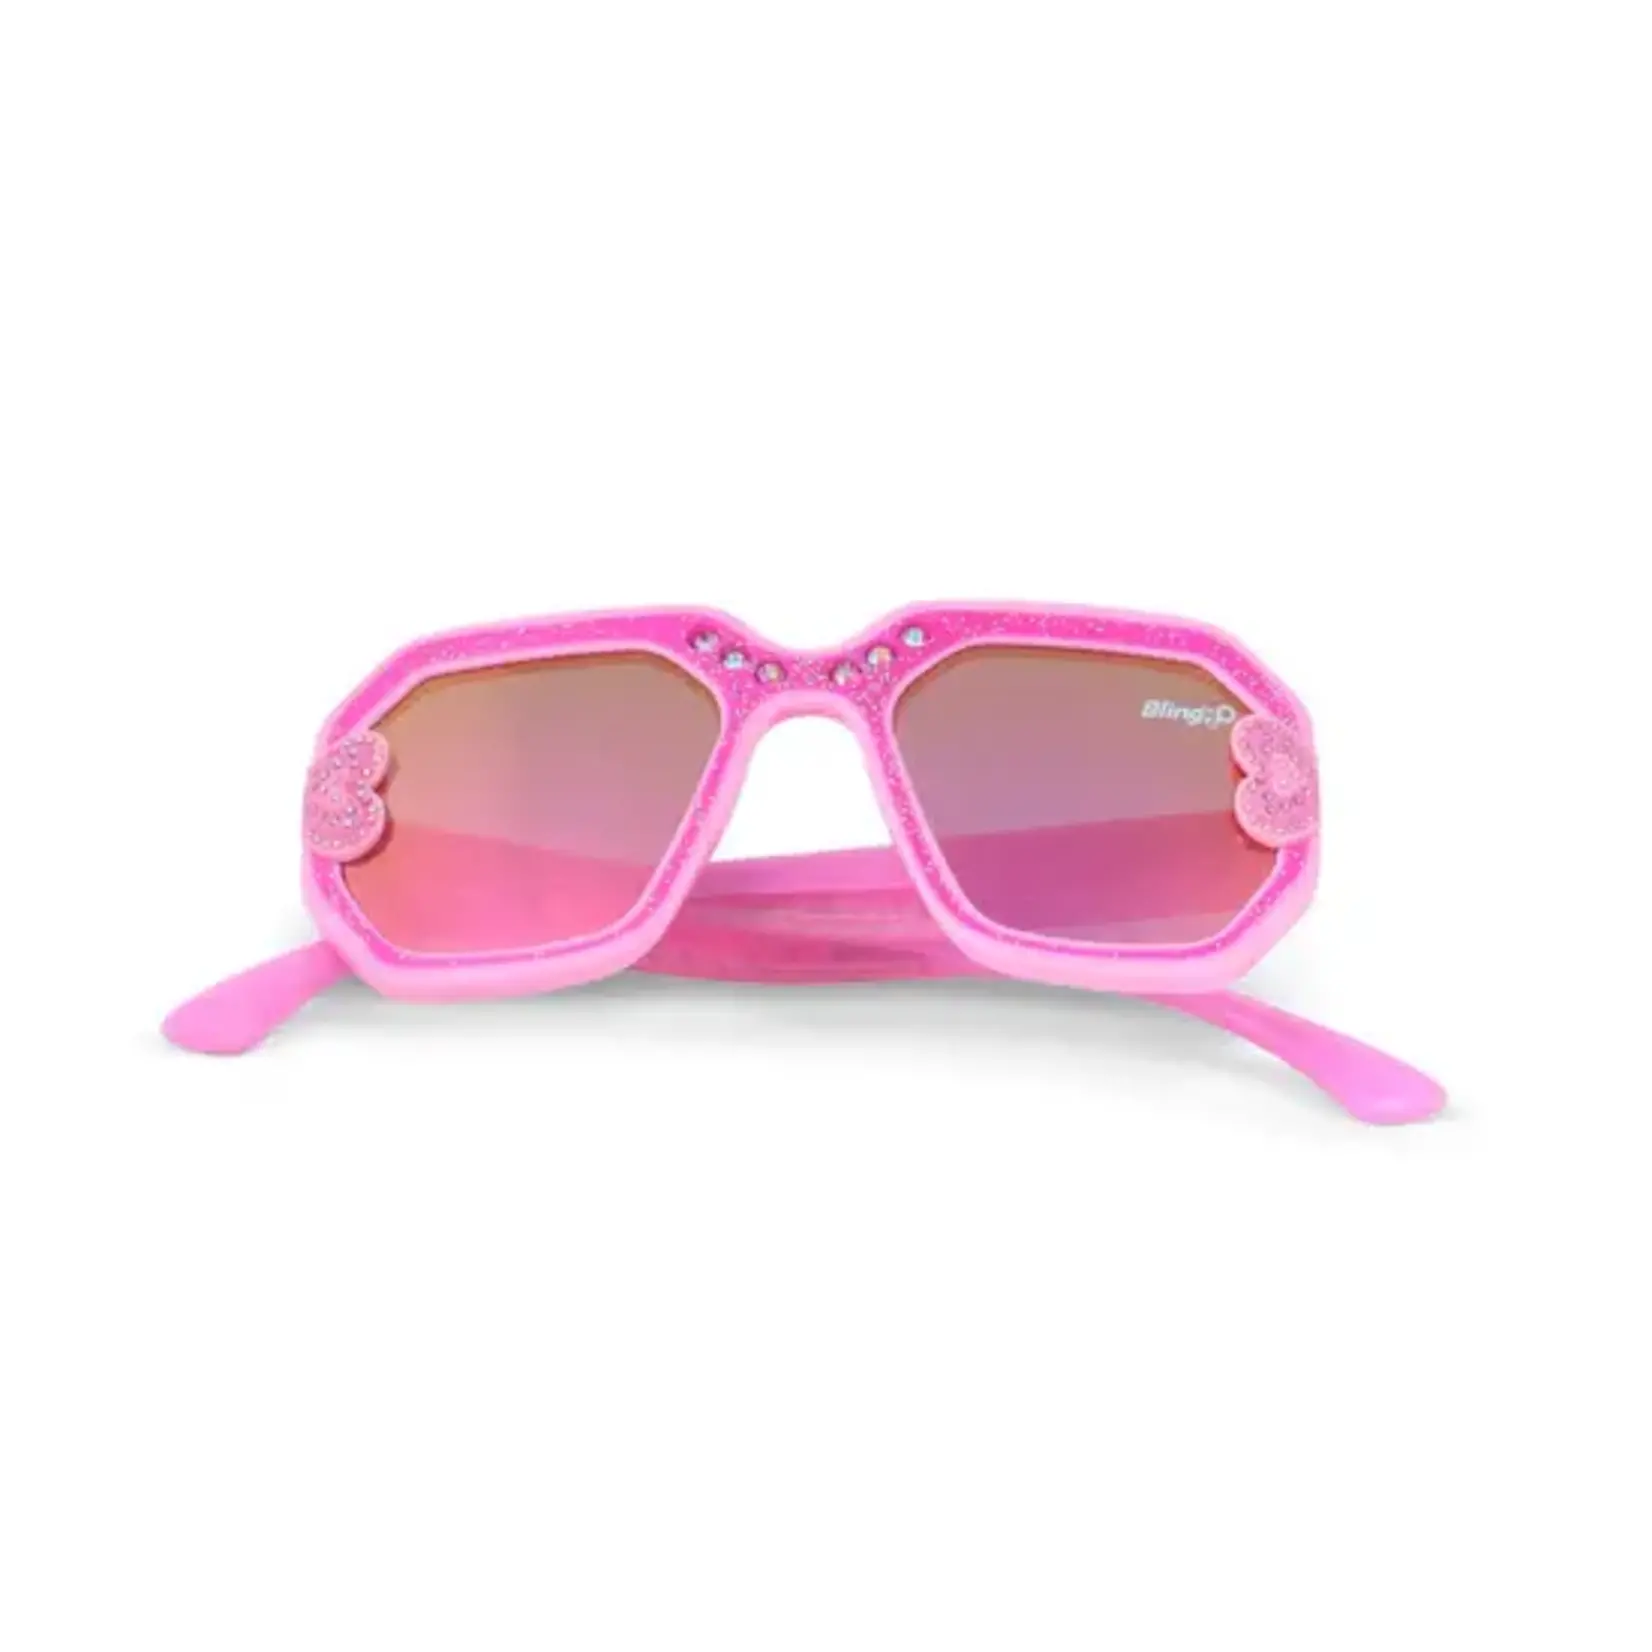 Bling 2 O Miami Beach Pink Youth Sunglasses